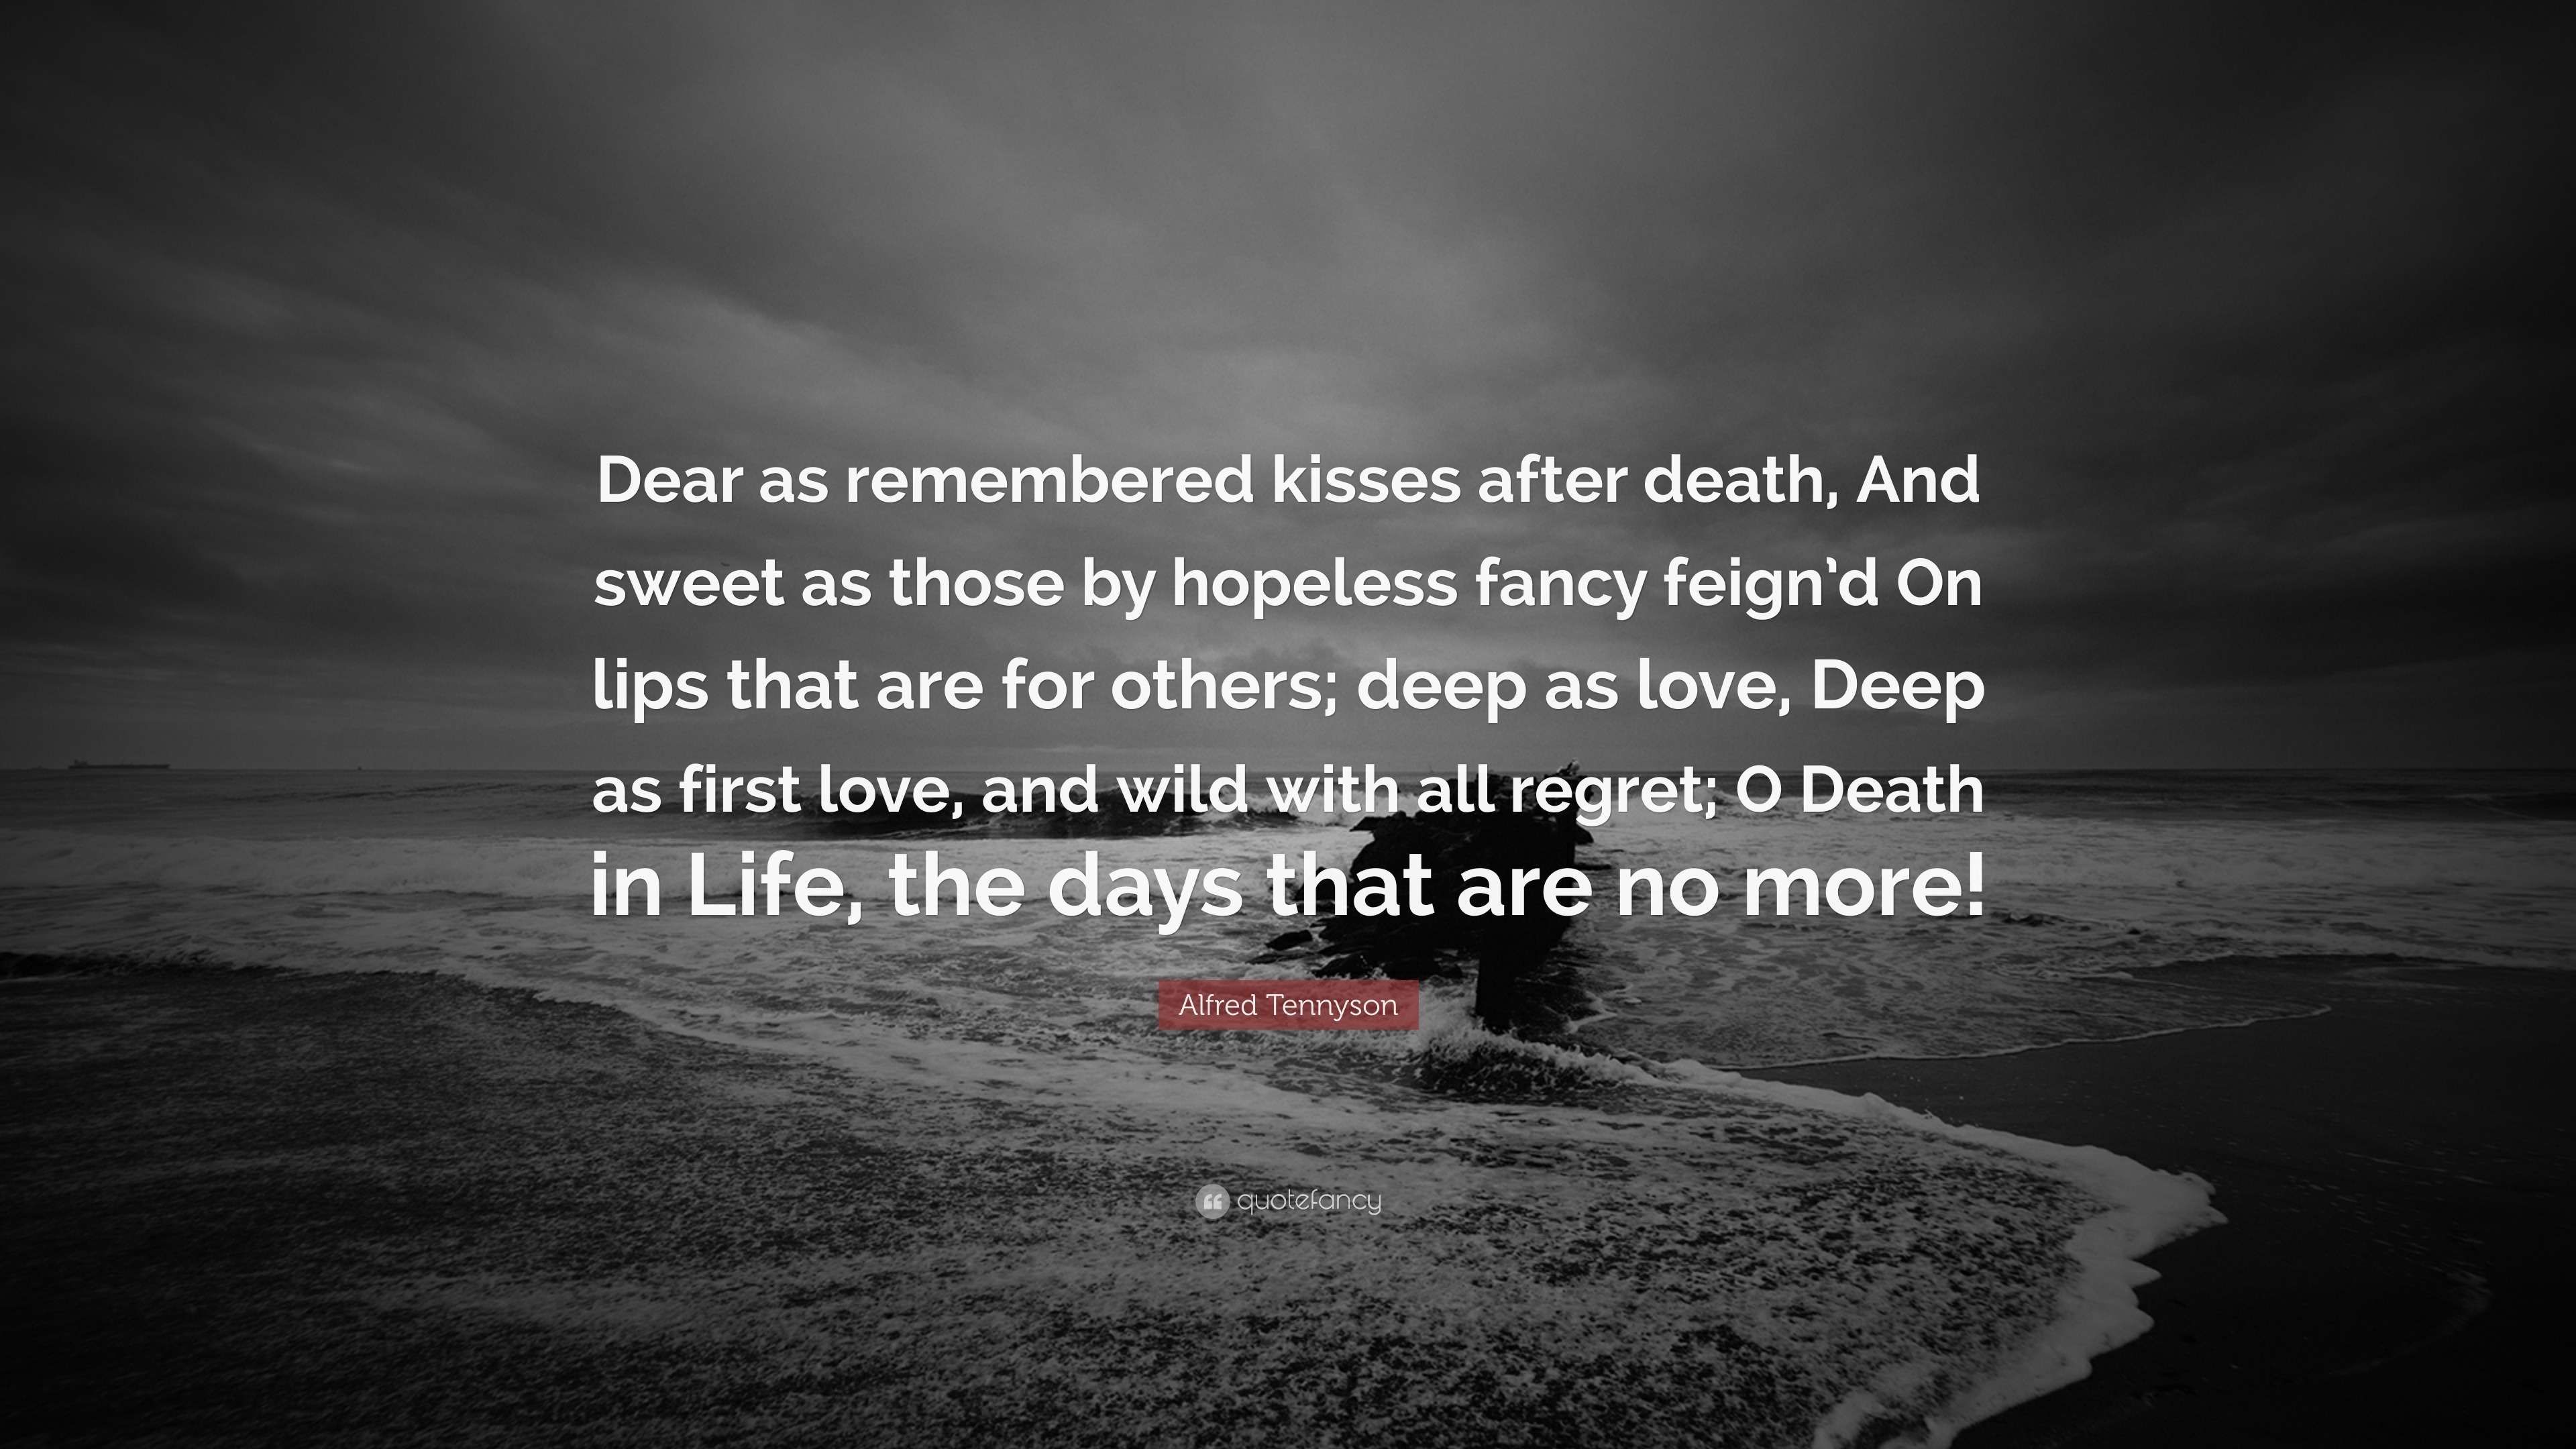 Alfred Tennyson Quote “Dear as remembered kisses after